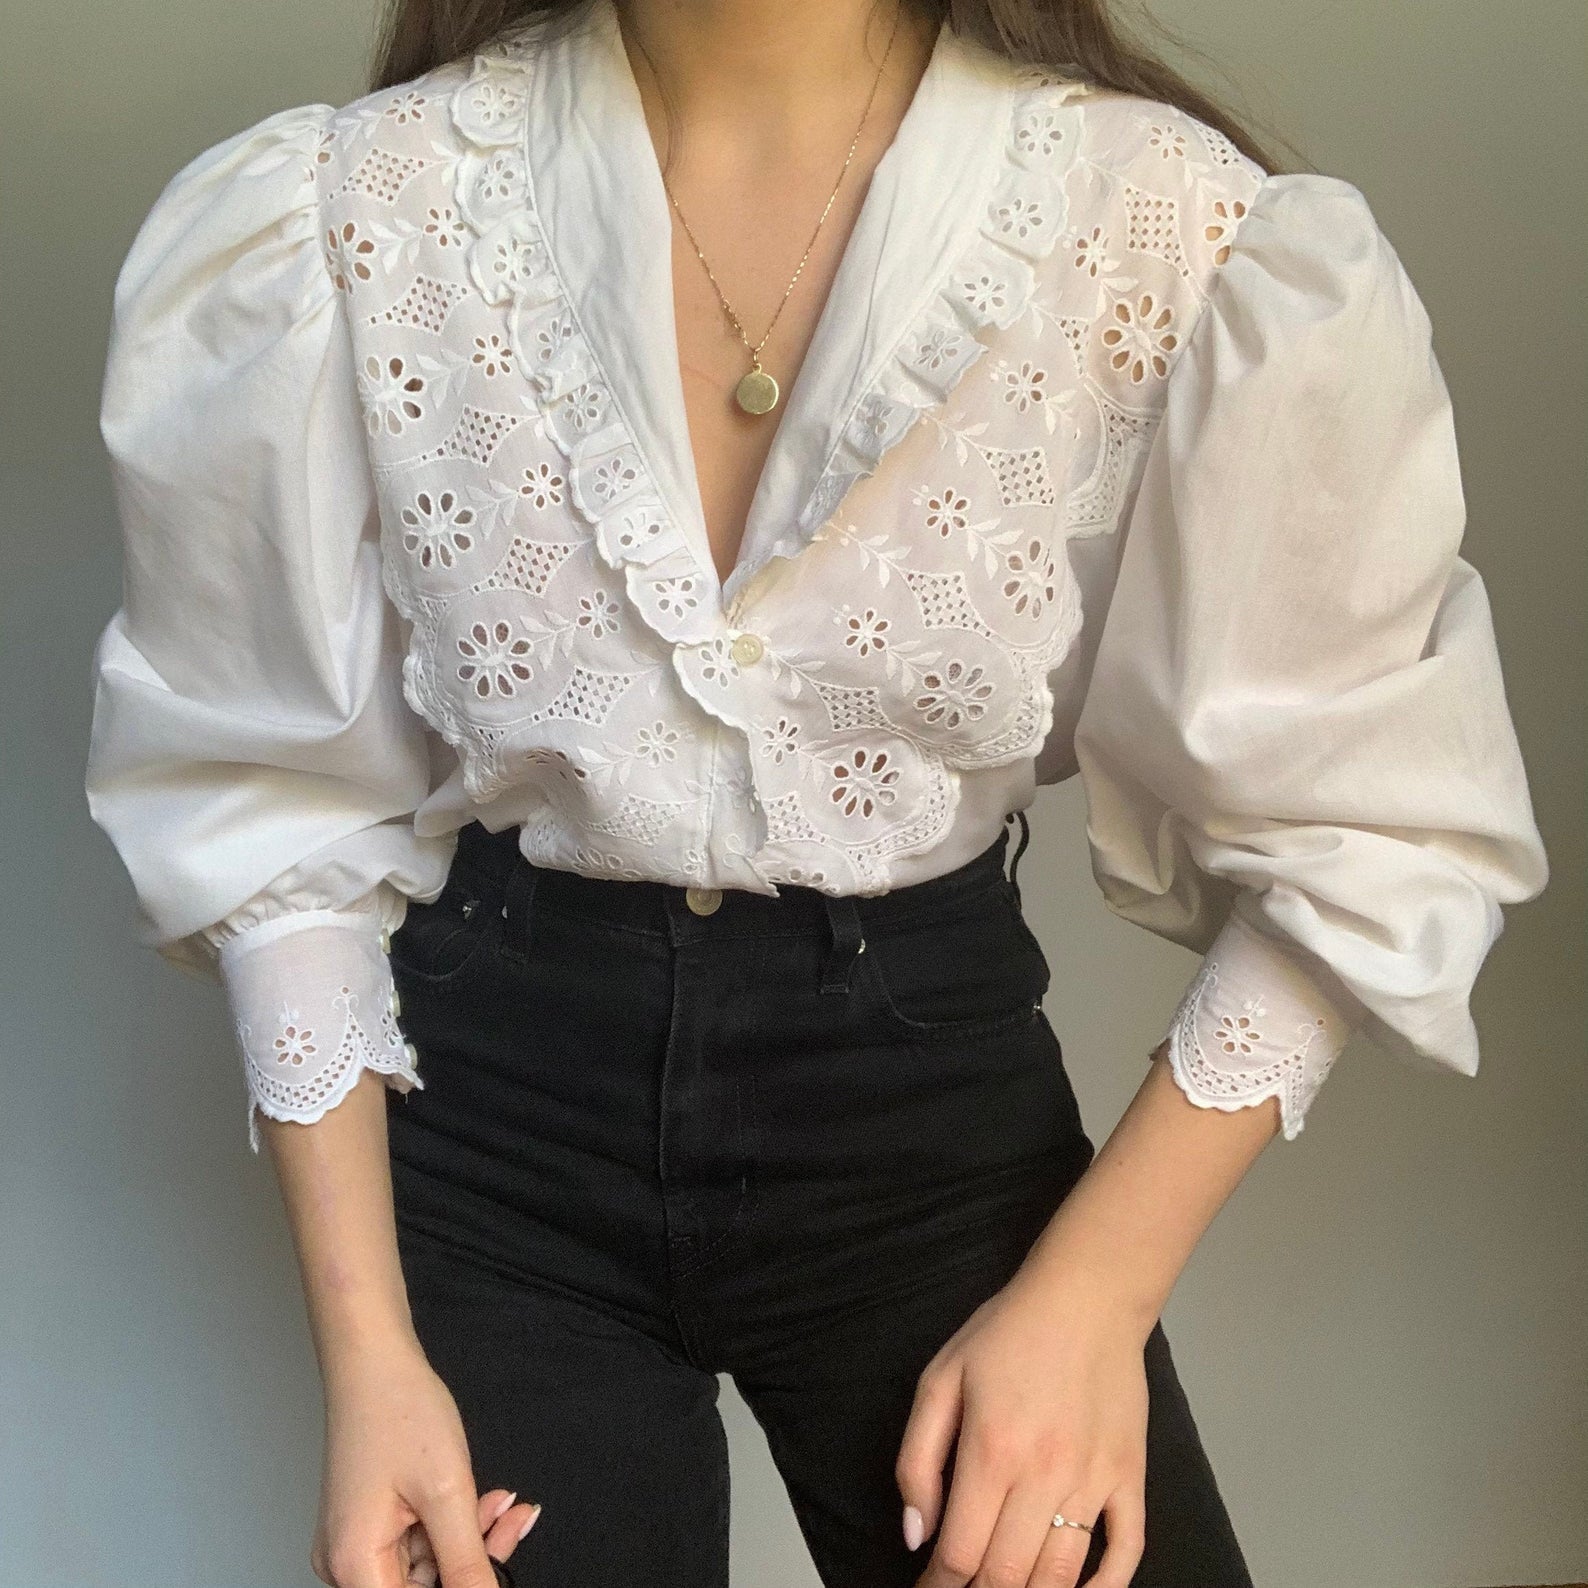 Asecondheart Vintage White Blouse With Embroidered Collar